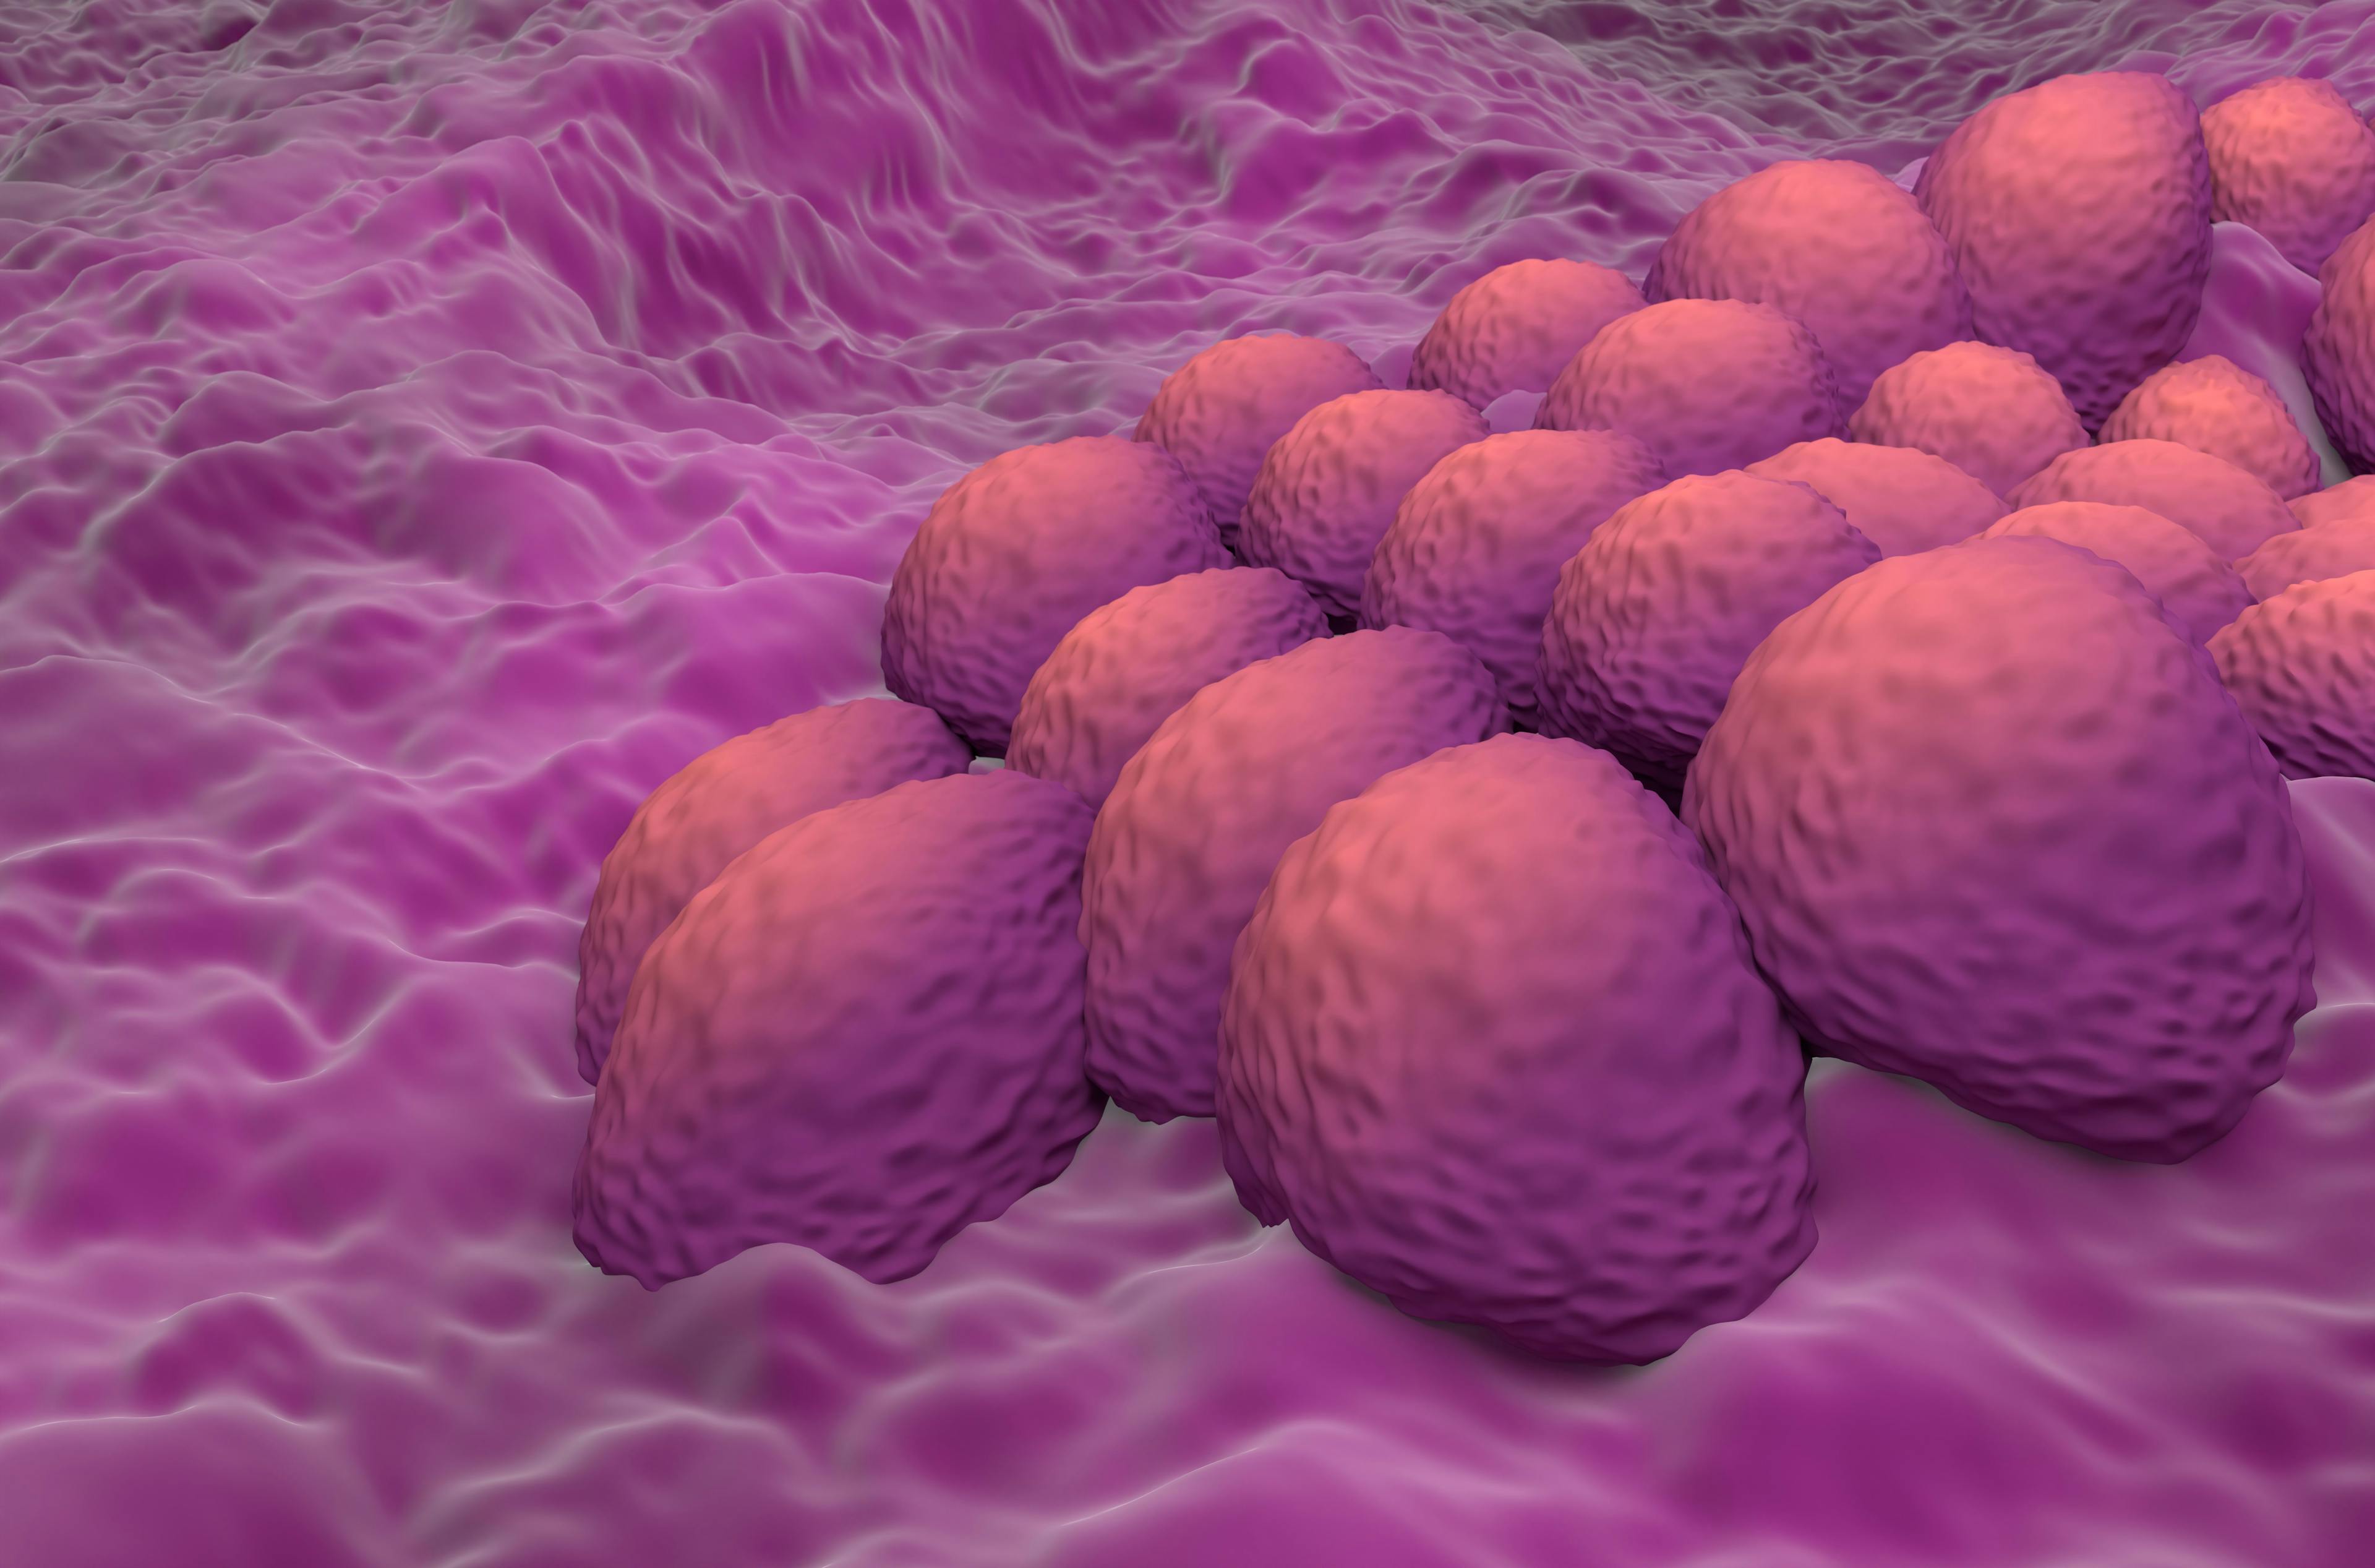 Endometrial cancer cells (adenocarcinoma) in the uterus or cervix (womb neck) - closeup view 3d illustration | Image Credit: © LASZLO